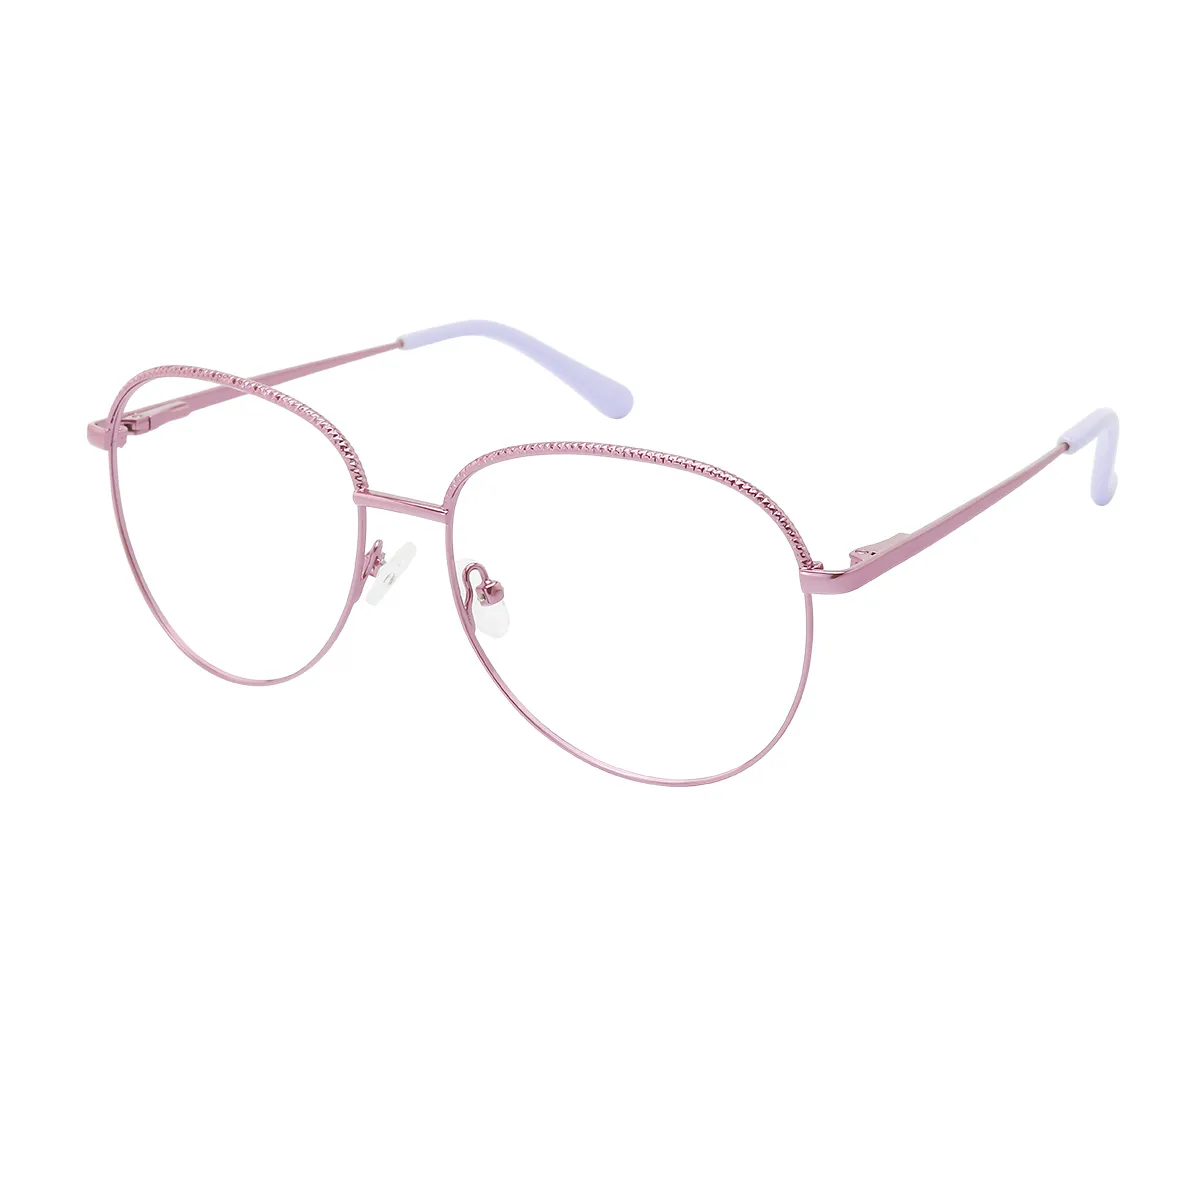 Carin - Round Rose Gold/Purple Glasses for Women